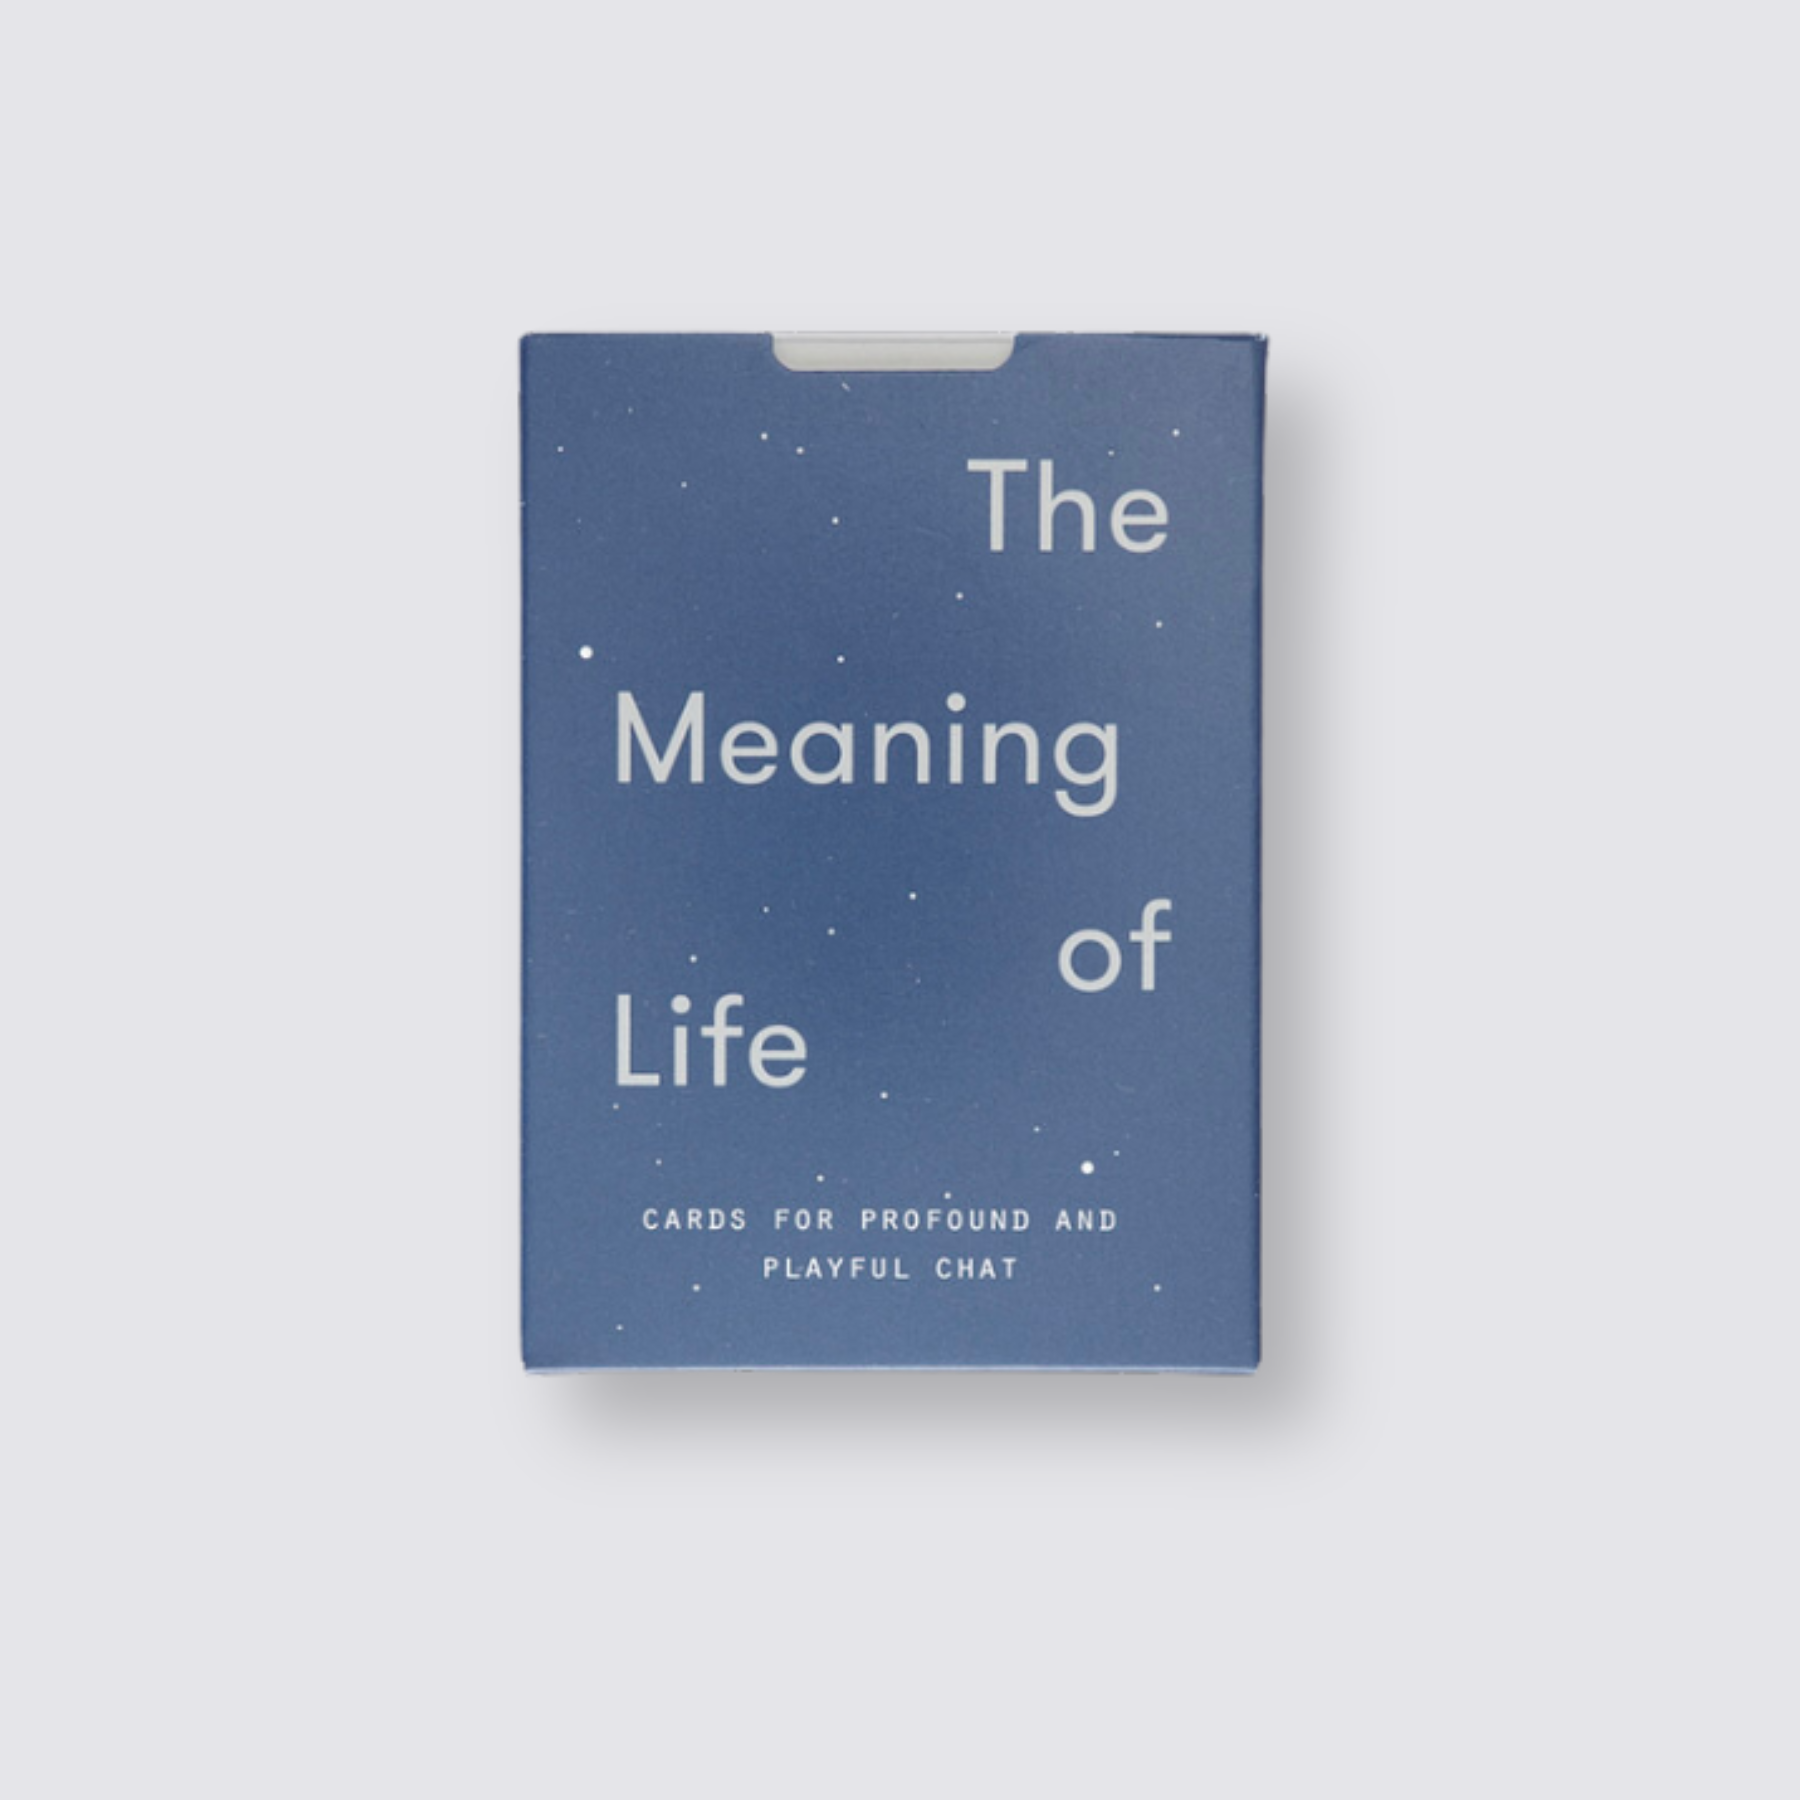 Meaning of Life cards